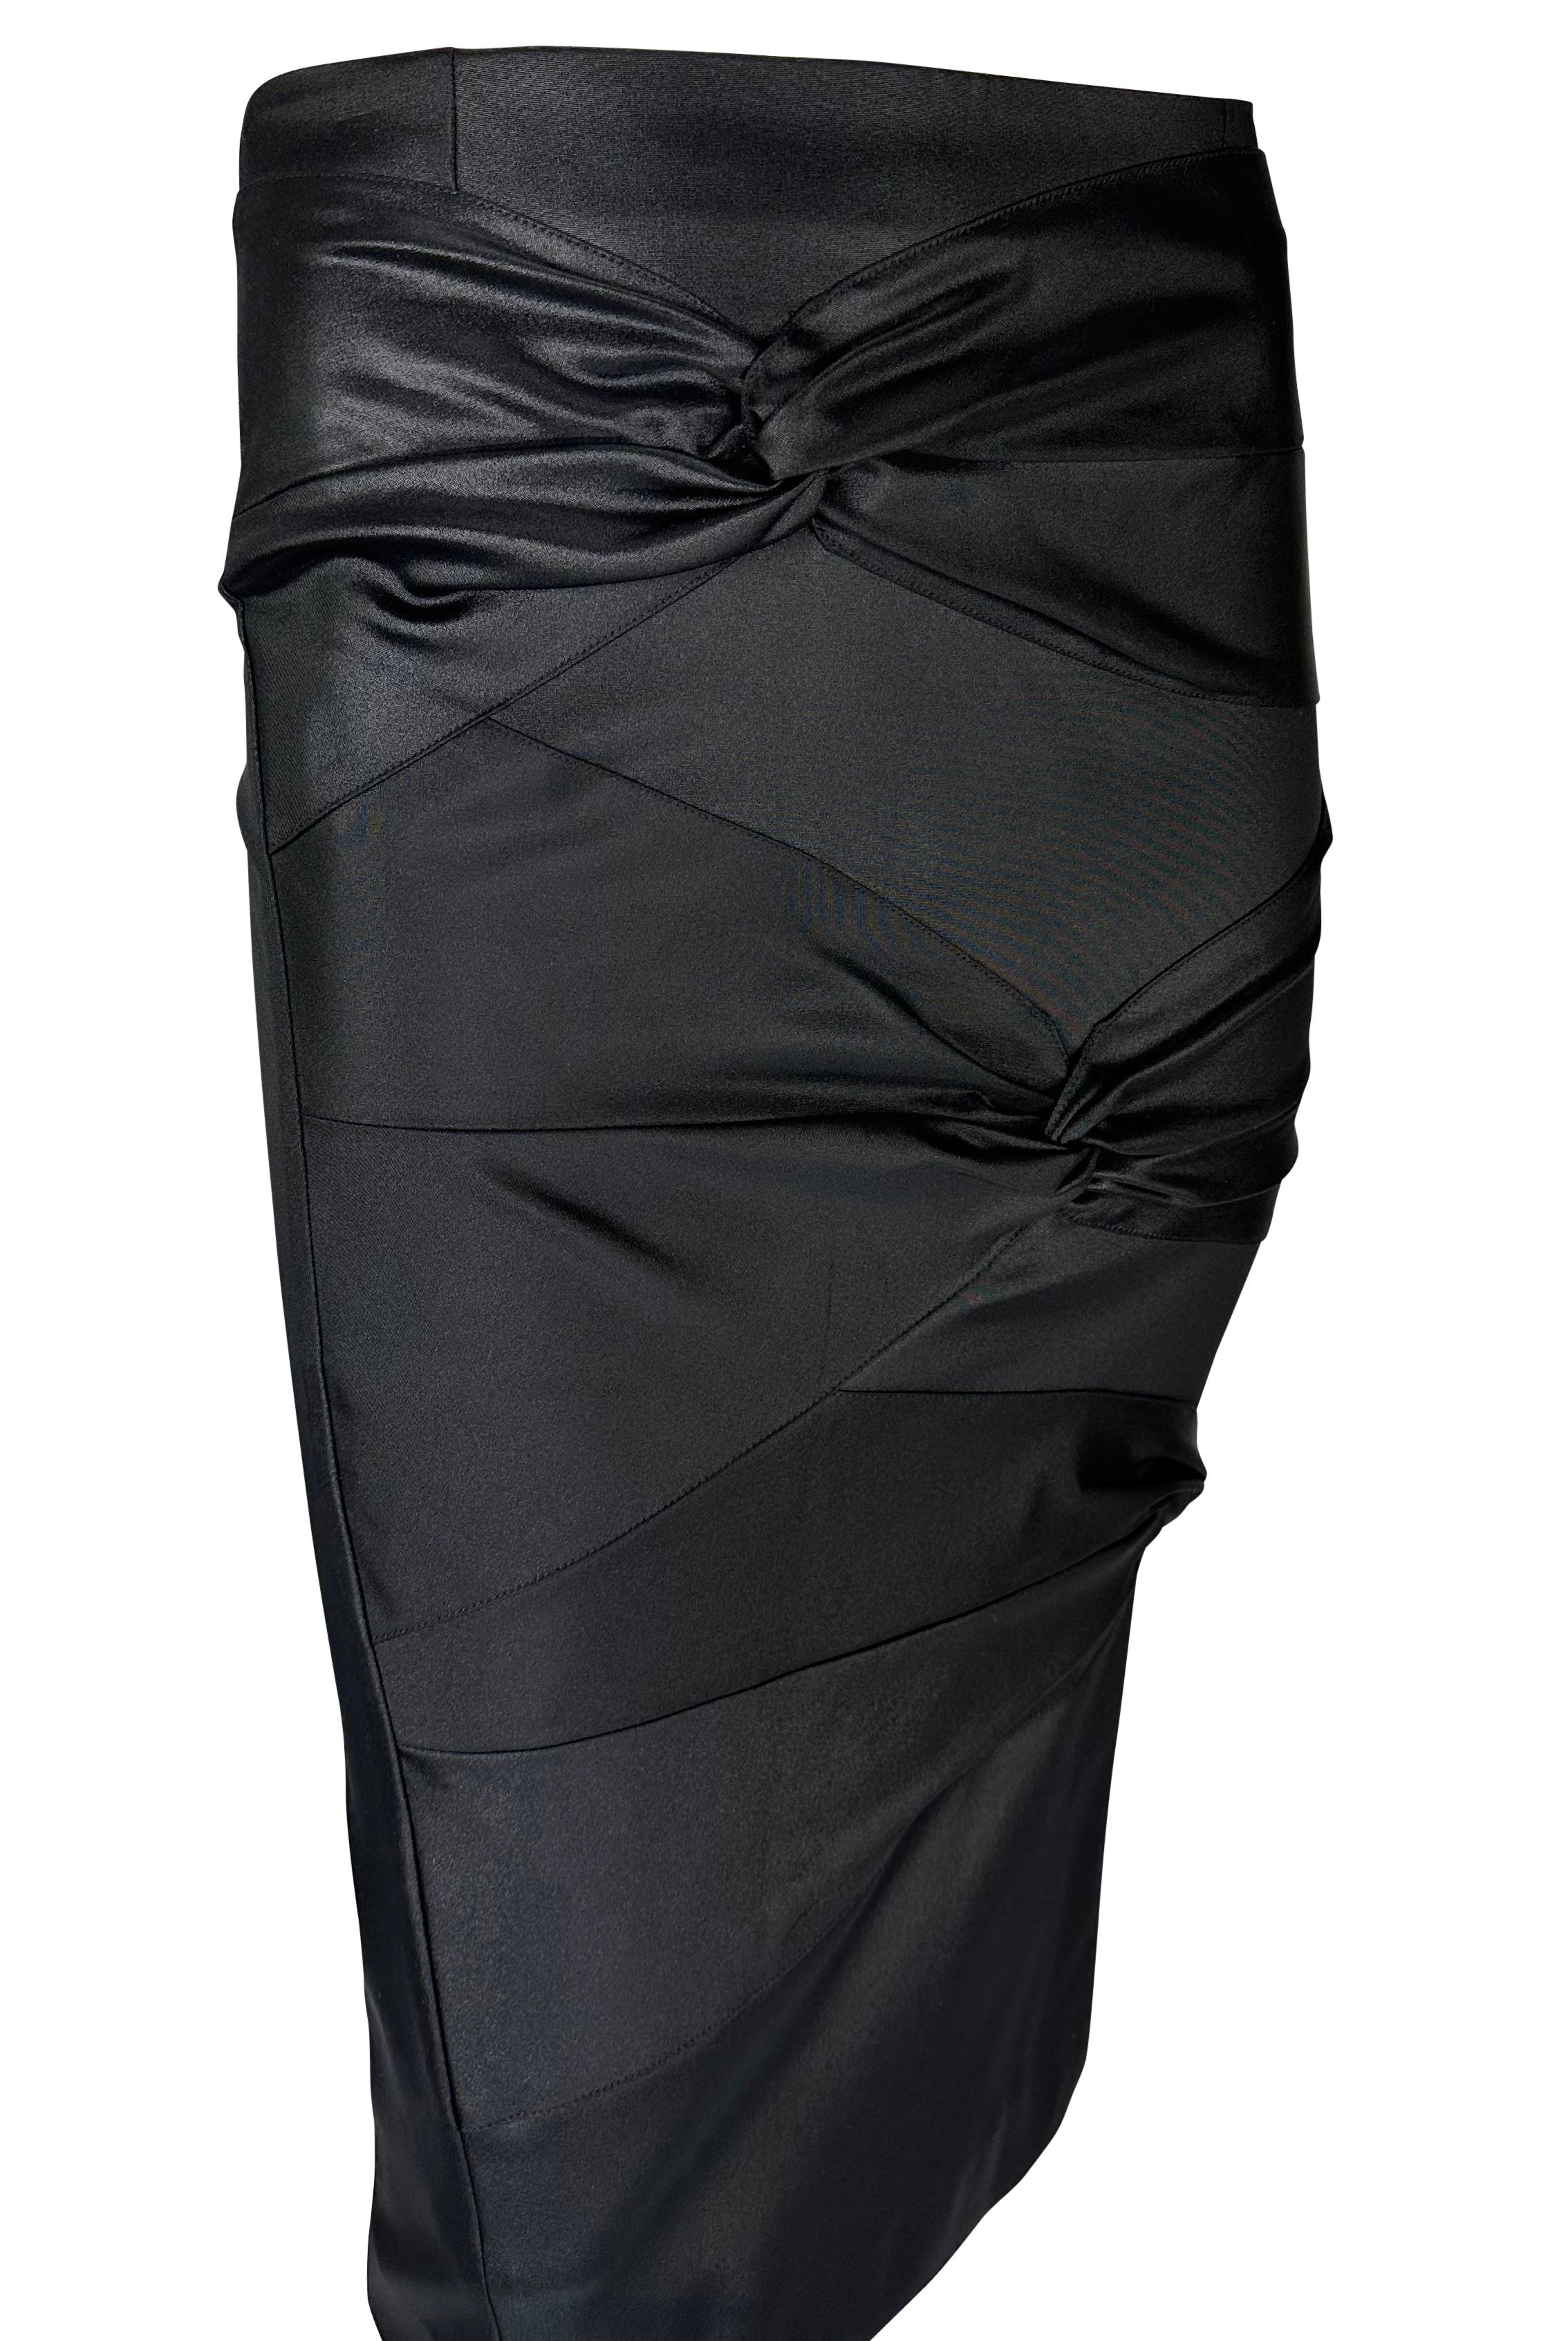 F/W 2003 Christian Dior by John Galliano Tie Accent Bodycon Stretch Skirt For Sale 4